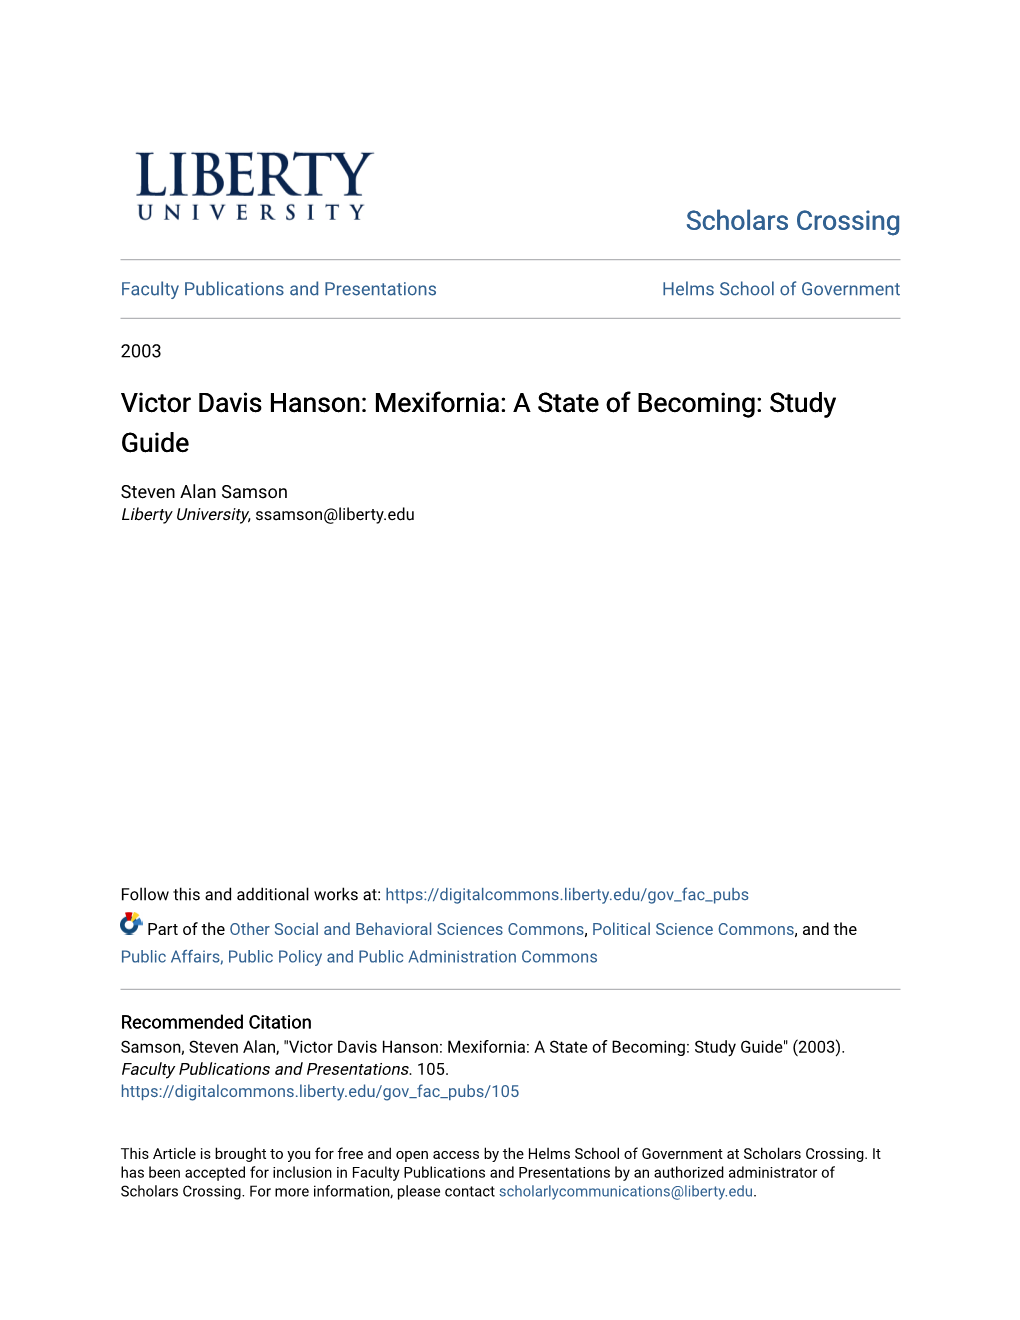 Victor Davis Hanson: Mexifornia: a State of Becoming: Study Guide